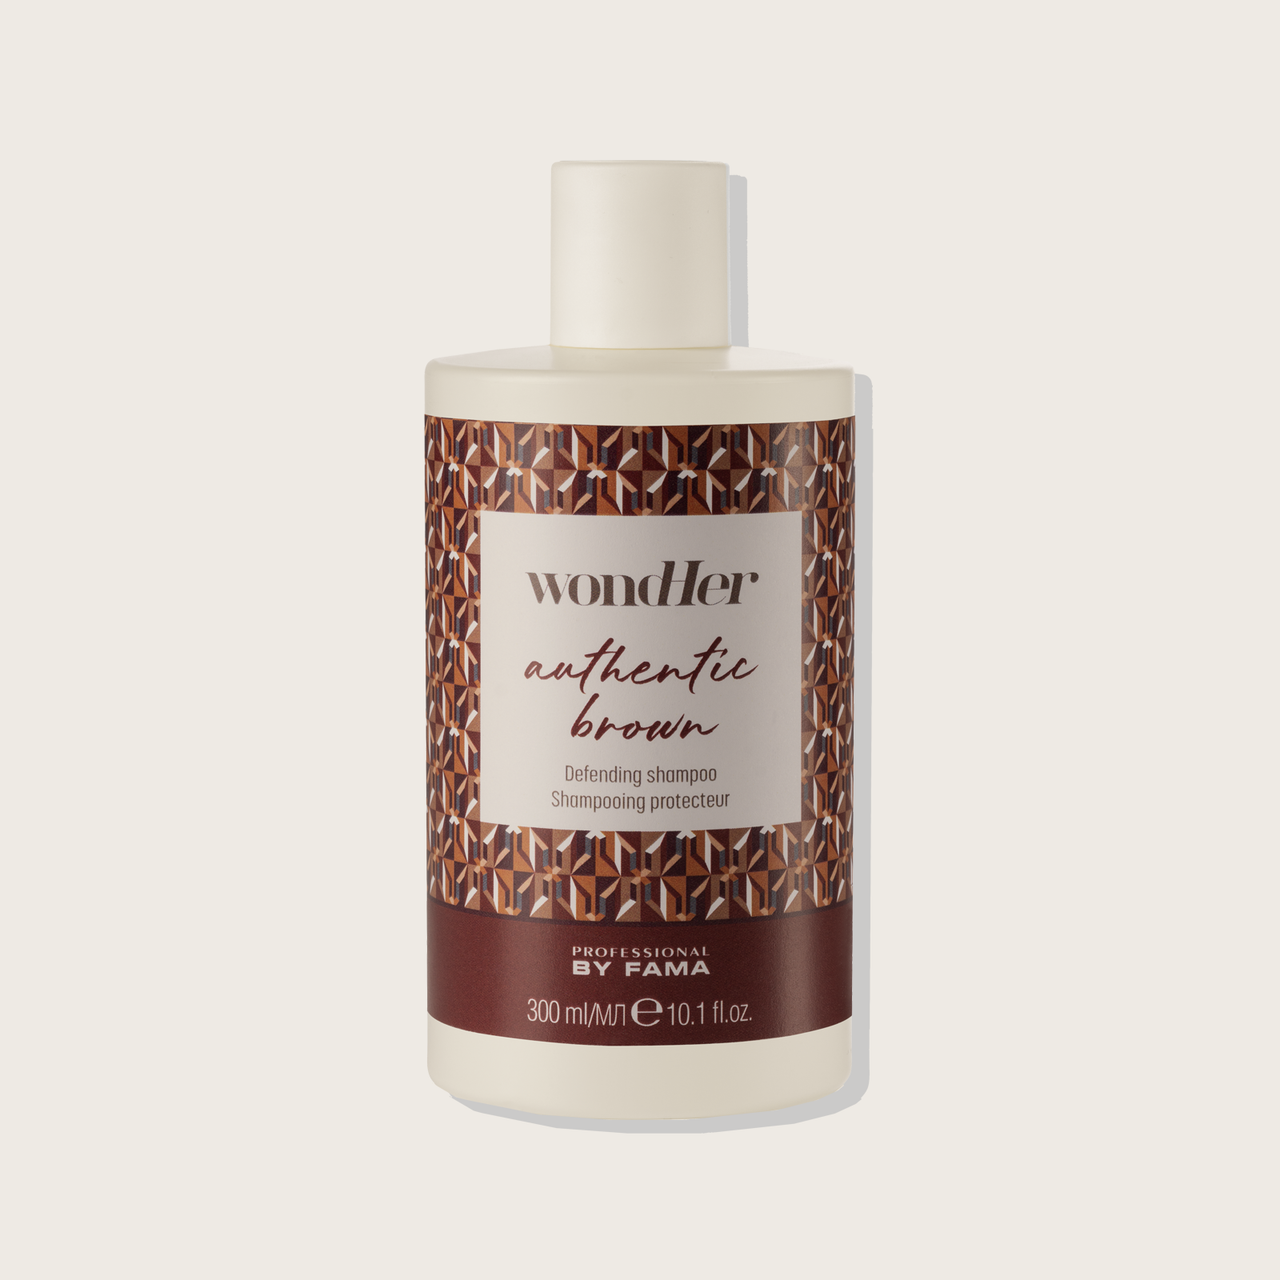 By Fama WONDHER AUTHENTIC BROWN DEFENDING SHAMPOO 